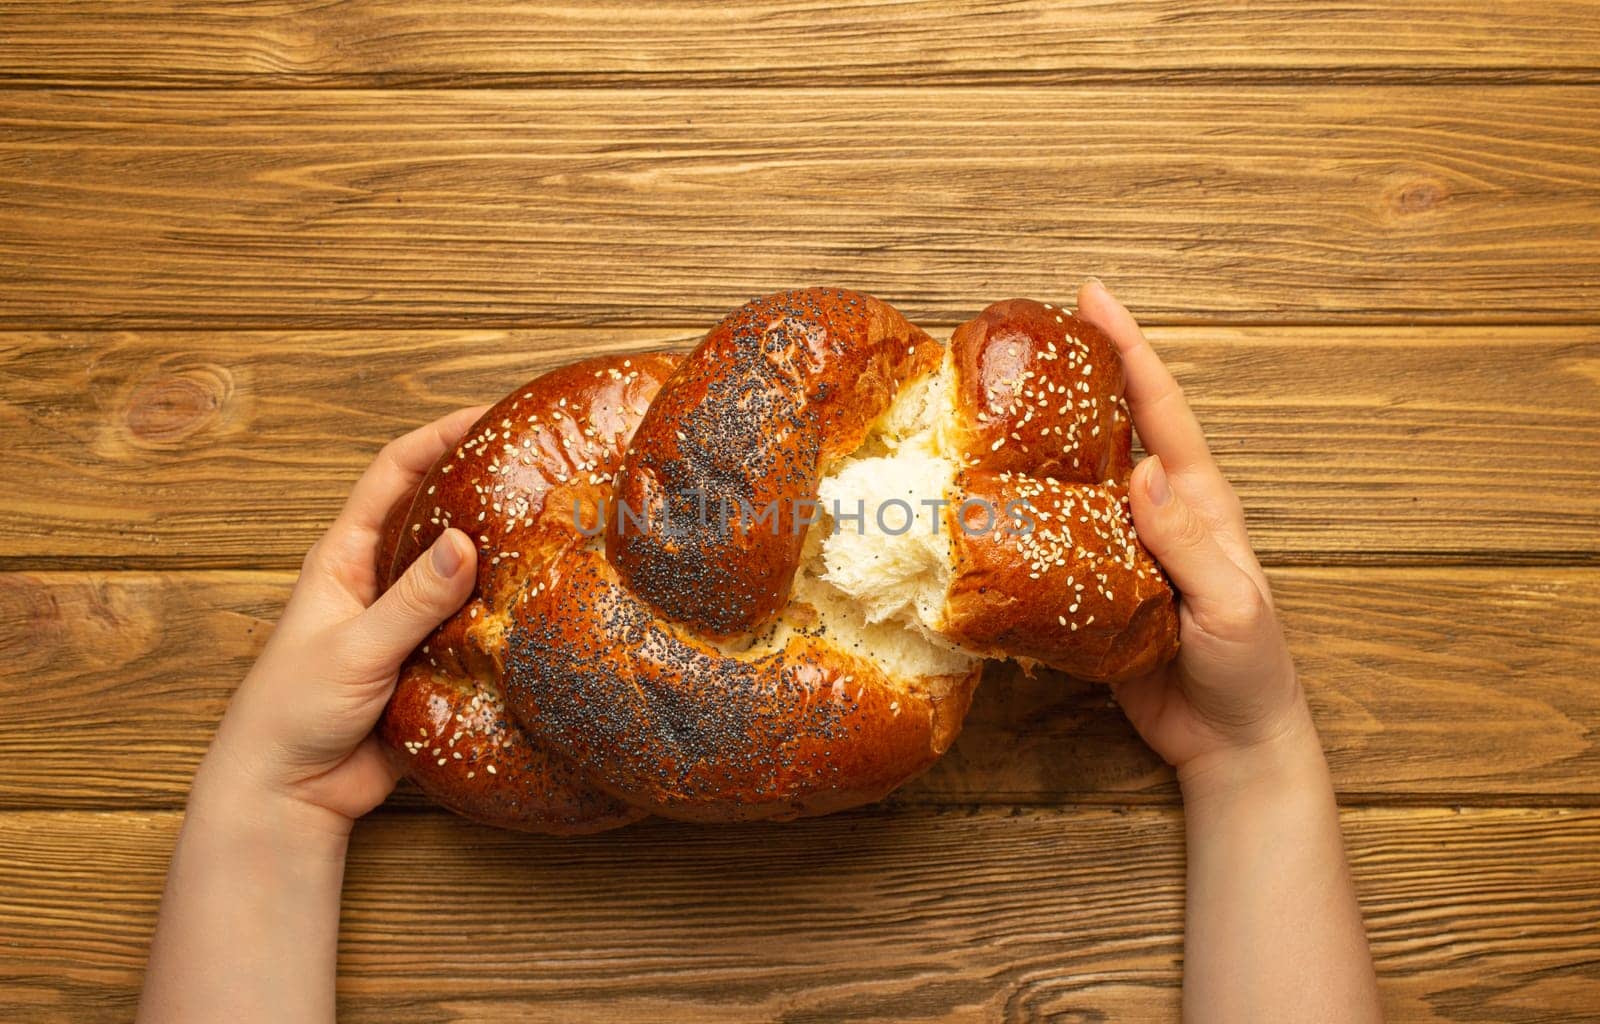 Female hands tearing off a piece of freshly baked Challah bread covered with poppy and sesame seeds, top view on rustic wooden background, traditional festive Jewish cuisine by its_al_dente